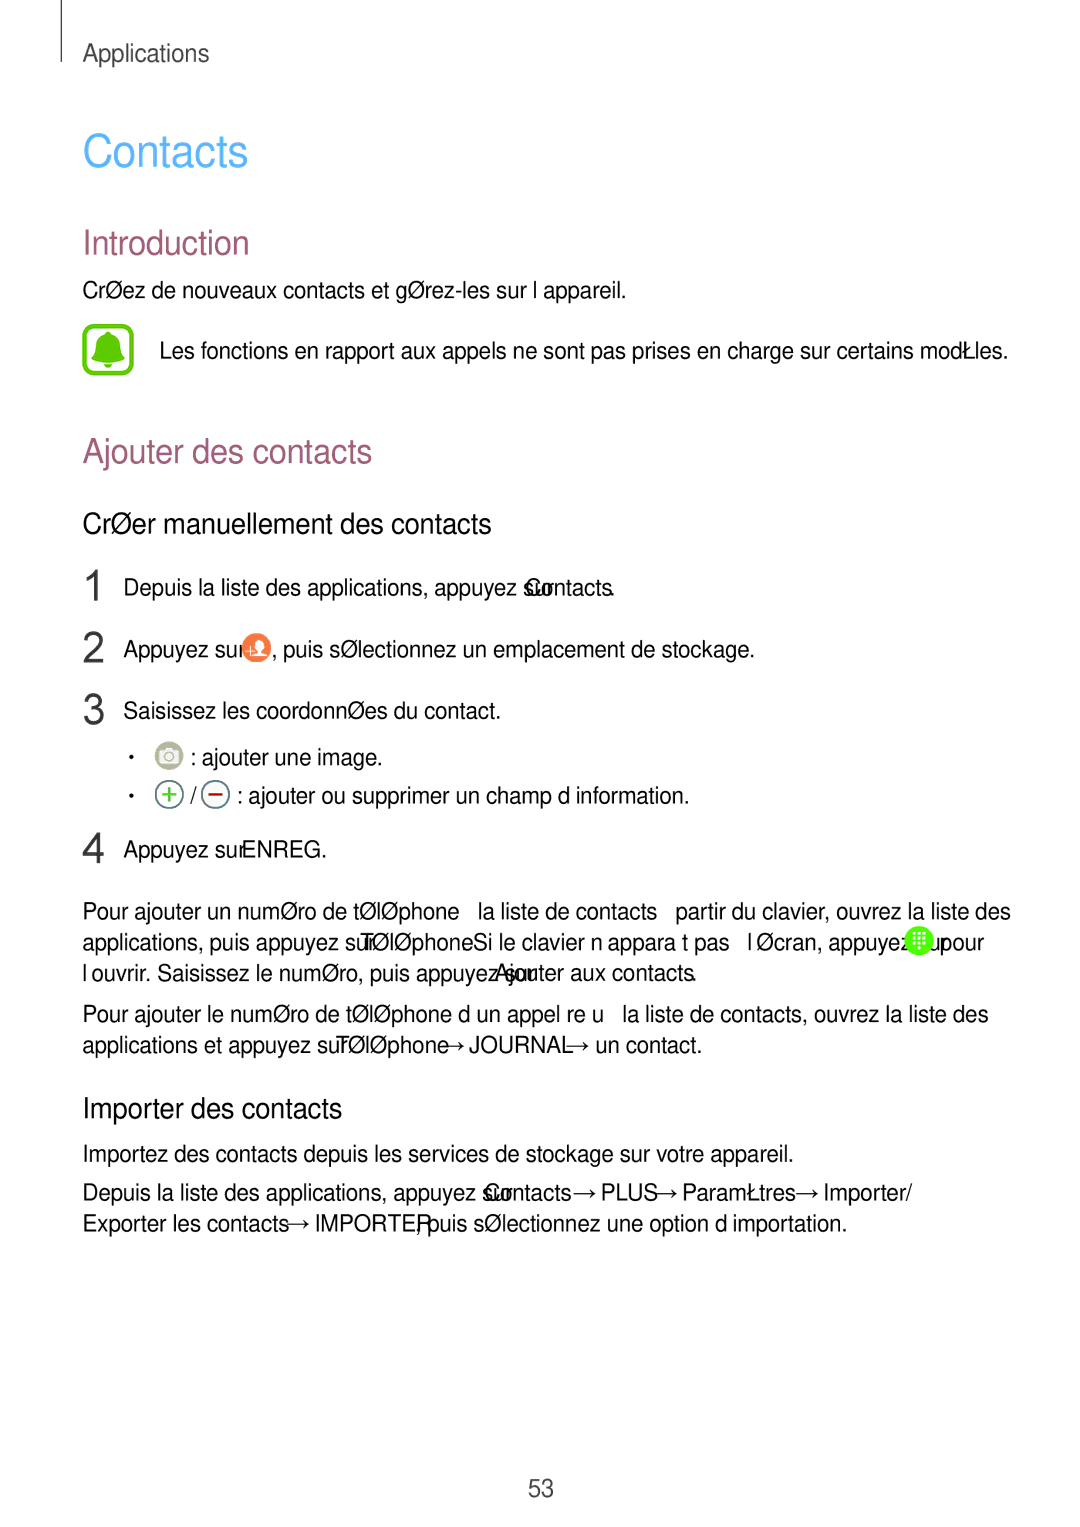 Samsung SM-T719NZKEXEF manual Contacts, Ajouter des contacts, Créer manuellement des contacts, Importer des contacts 